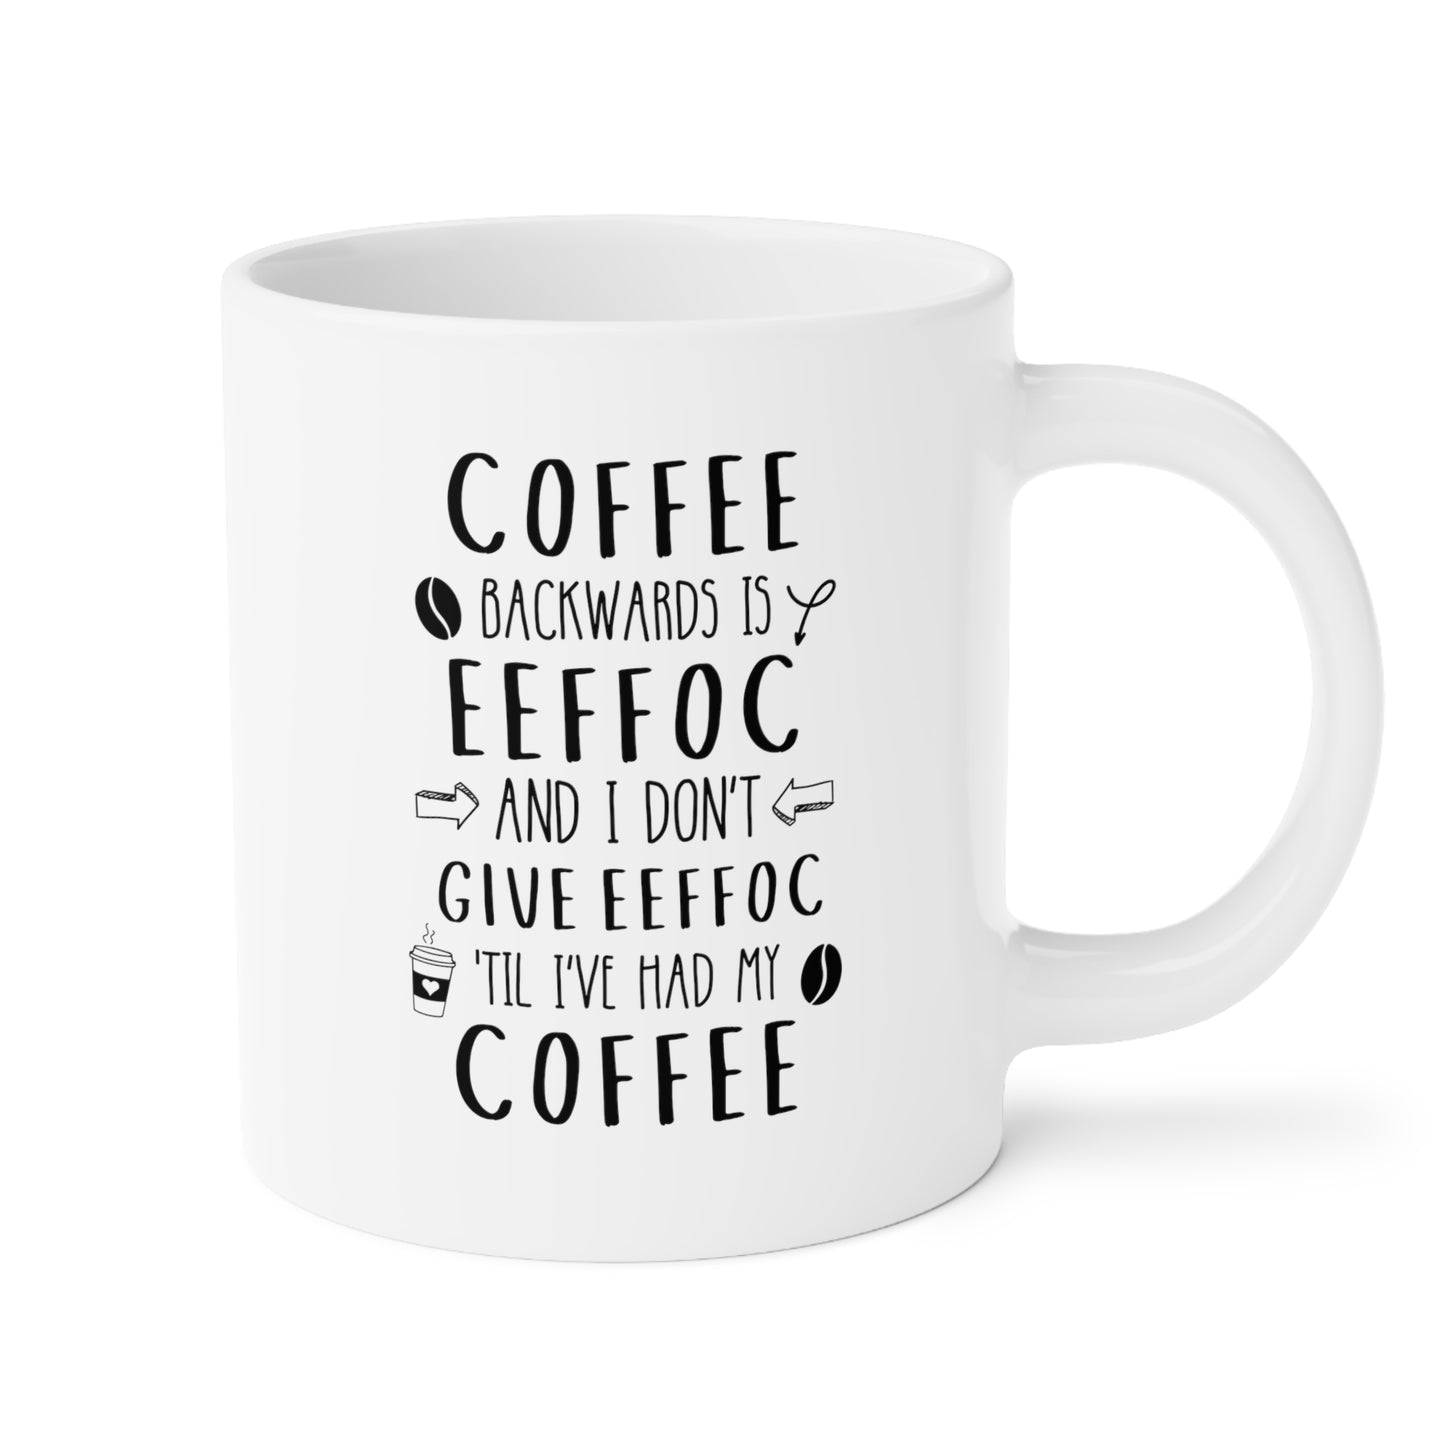 Coffee Backwards Is Eeffoc And I Dont Give Eeffoc Til Ive Had My Coffee 20oz white funny large coffee mug morning adult humour office waveywares wavey wares wavywares wavy wares